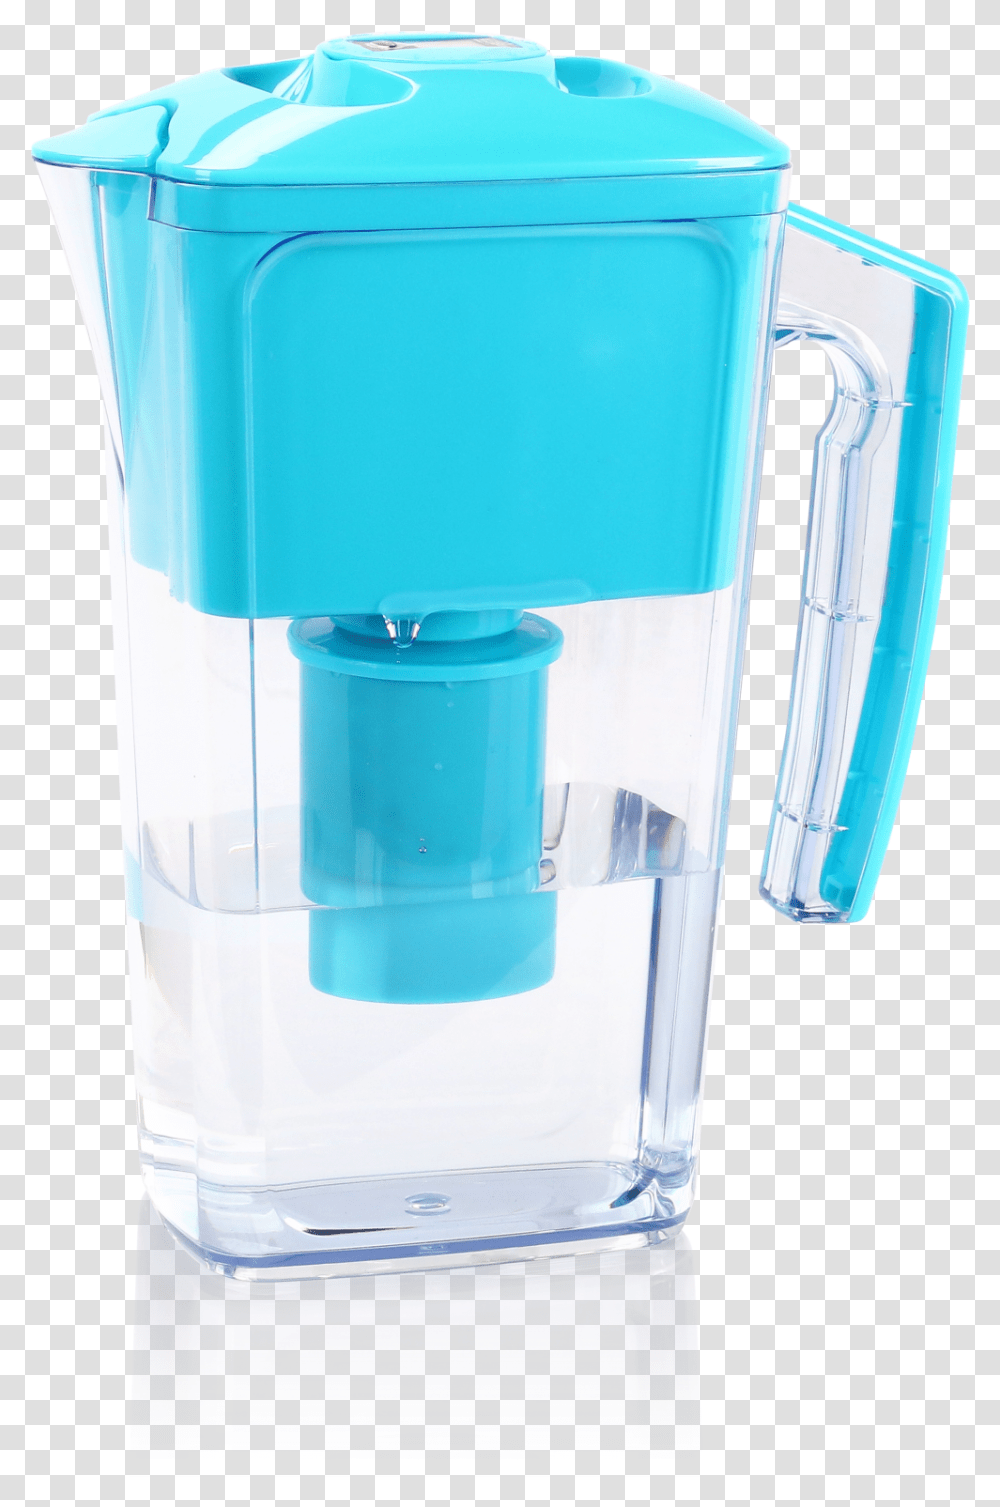 Dr Domum Wellblue Alkaline Water Pitcher 25l Mineral Wellblue, Jug, Appliance, Mixer, Water Jug Transparent Png